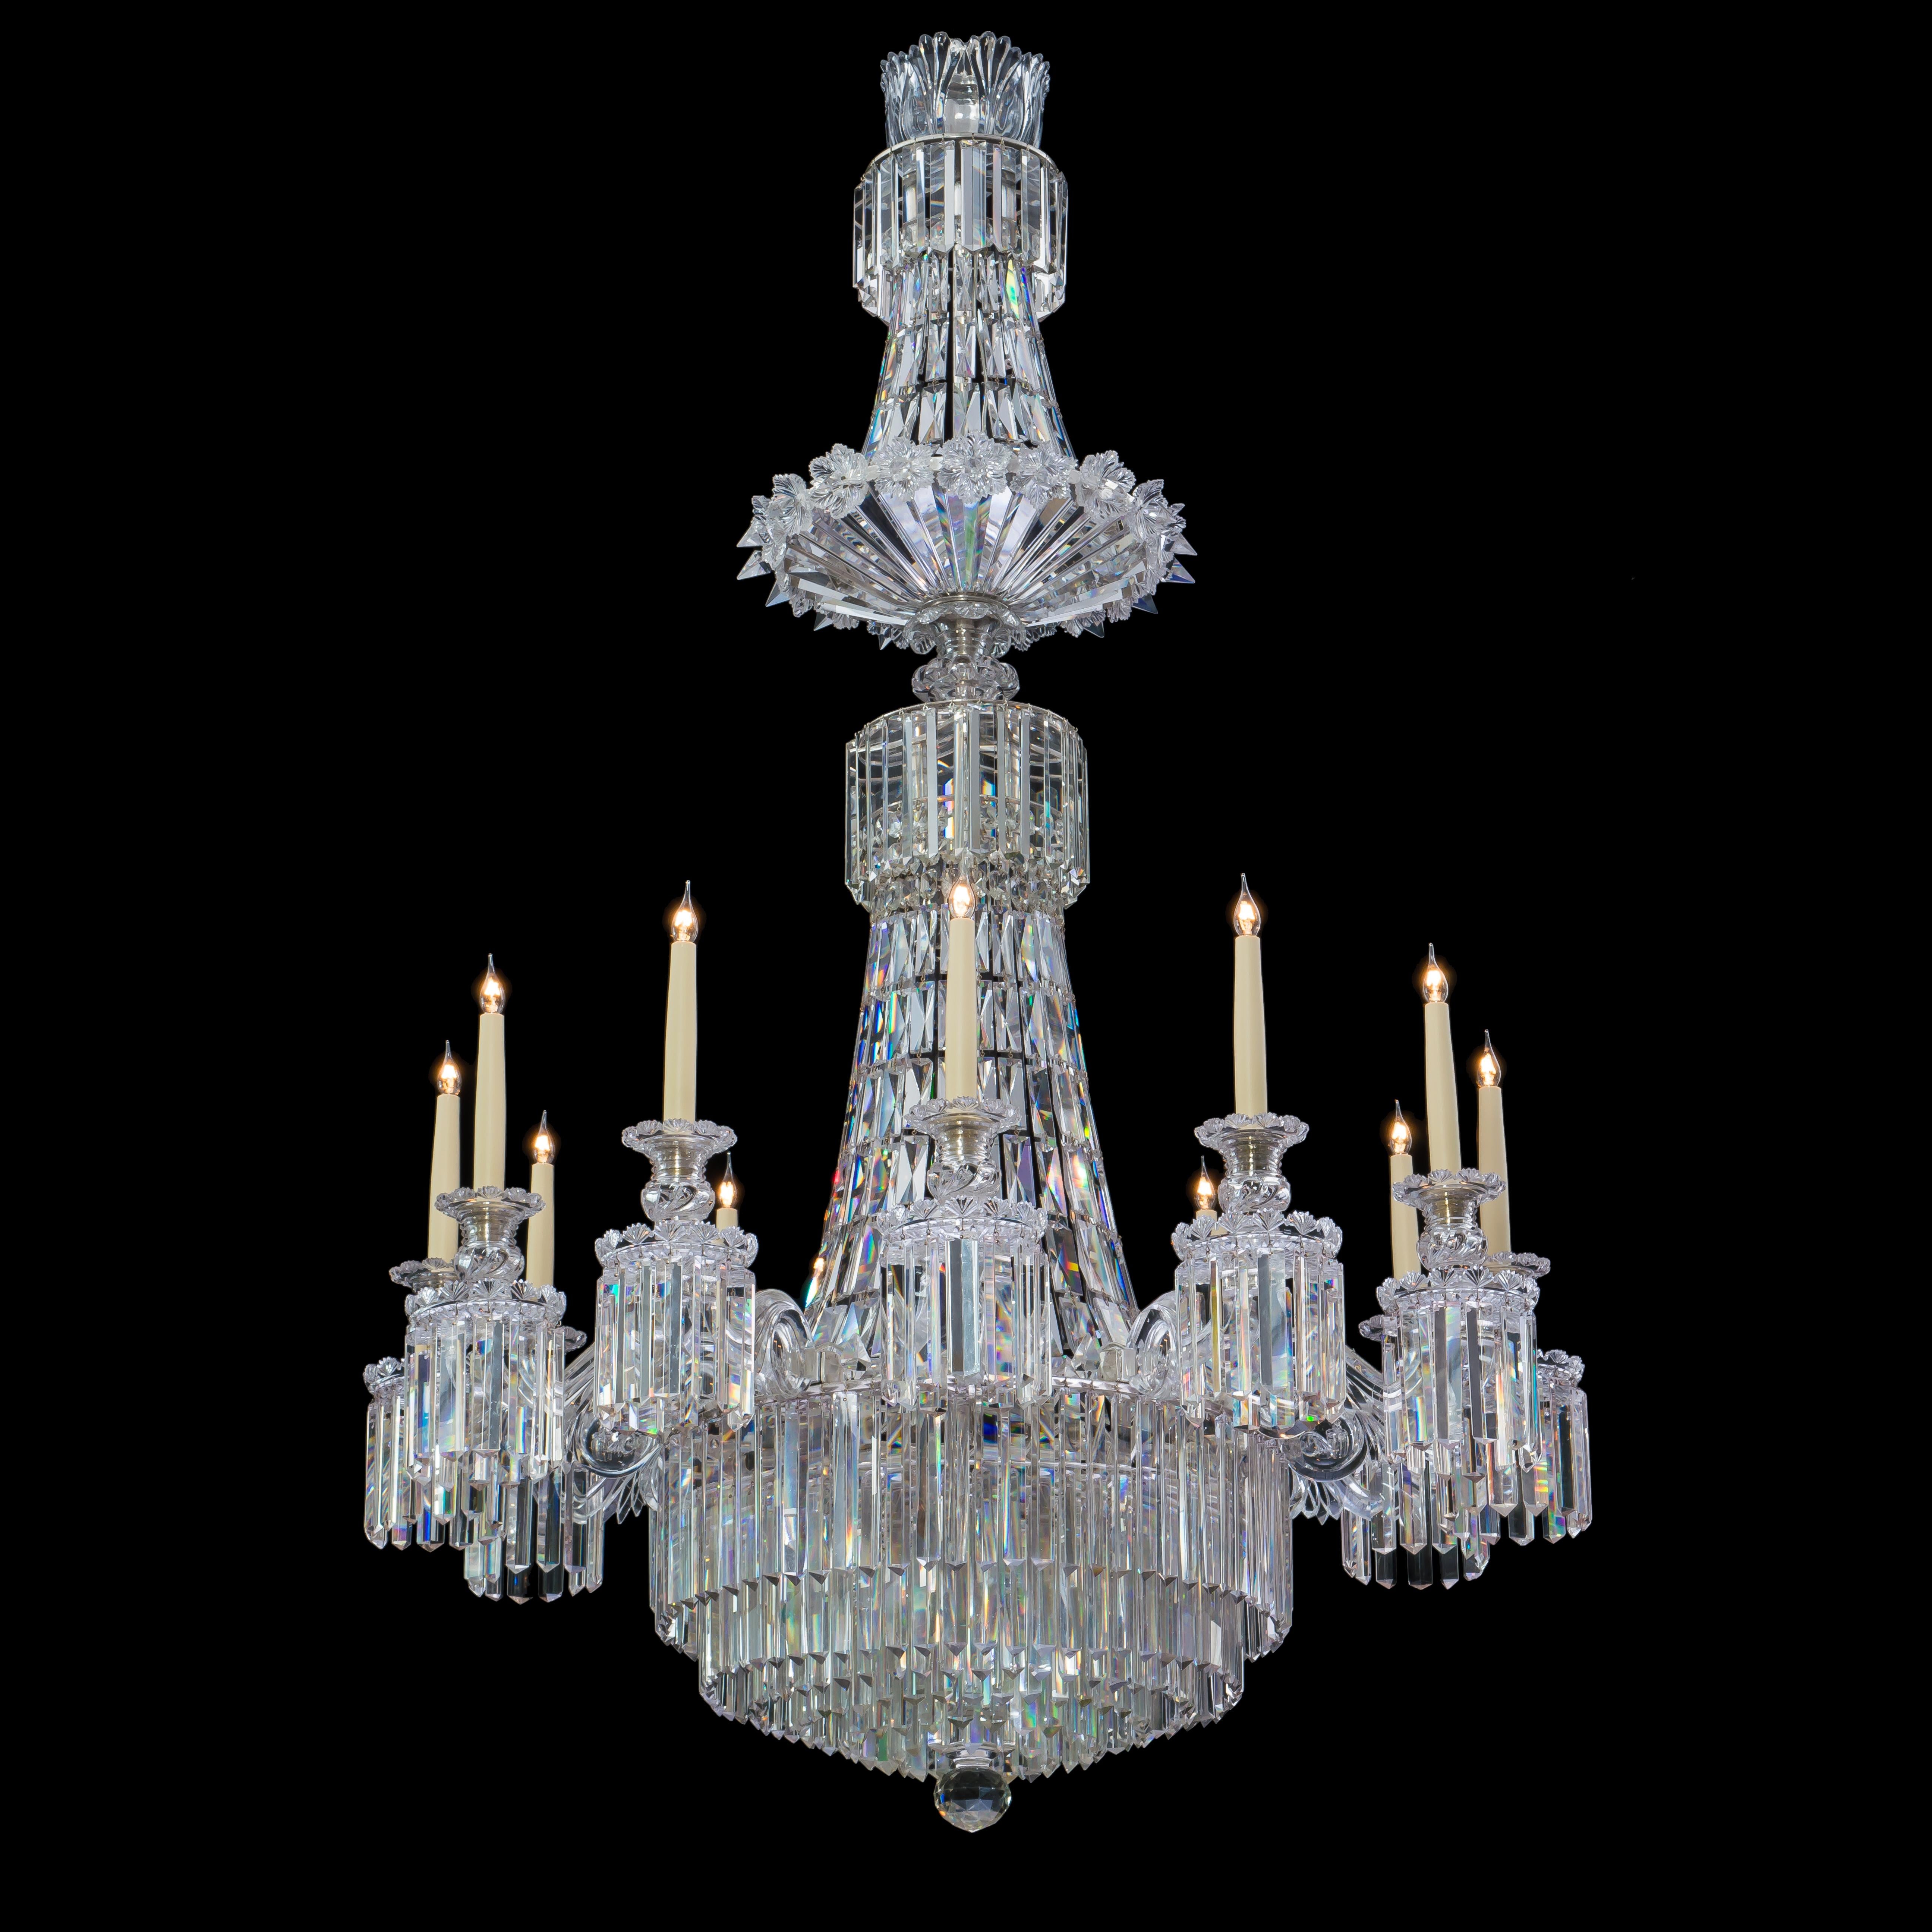 A fine William IV cut-glass twelve-light chandelier, firmly attributed to Perry & Co. 

This magnificent chandelier relates to examples in the collection at Chatsworth House which were acquired by the 6th Duke of Devonshire for his London